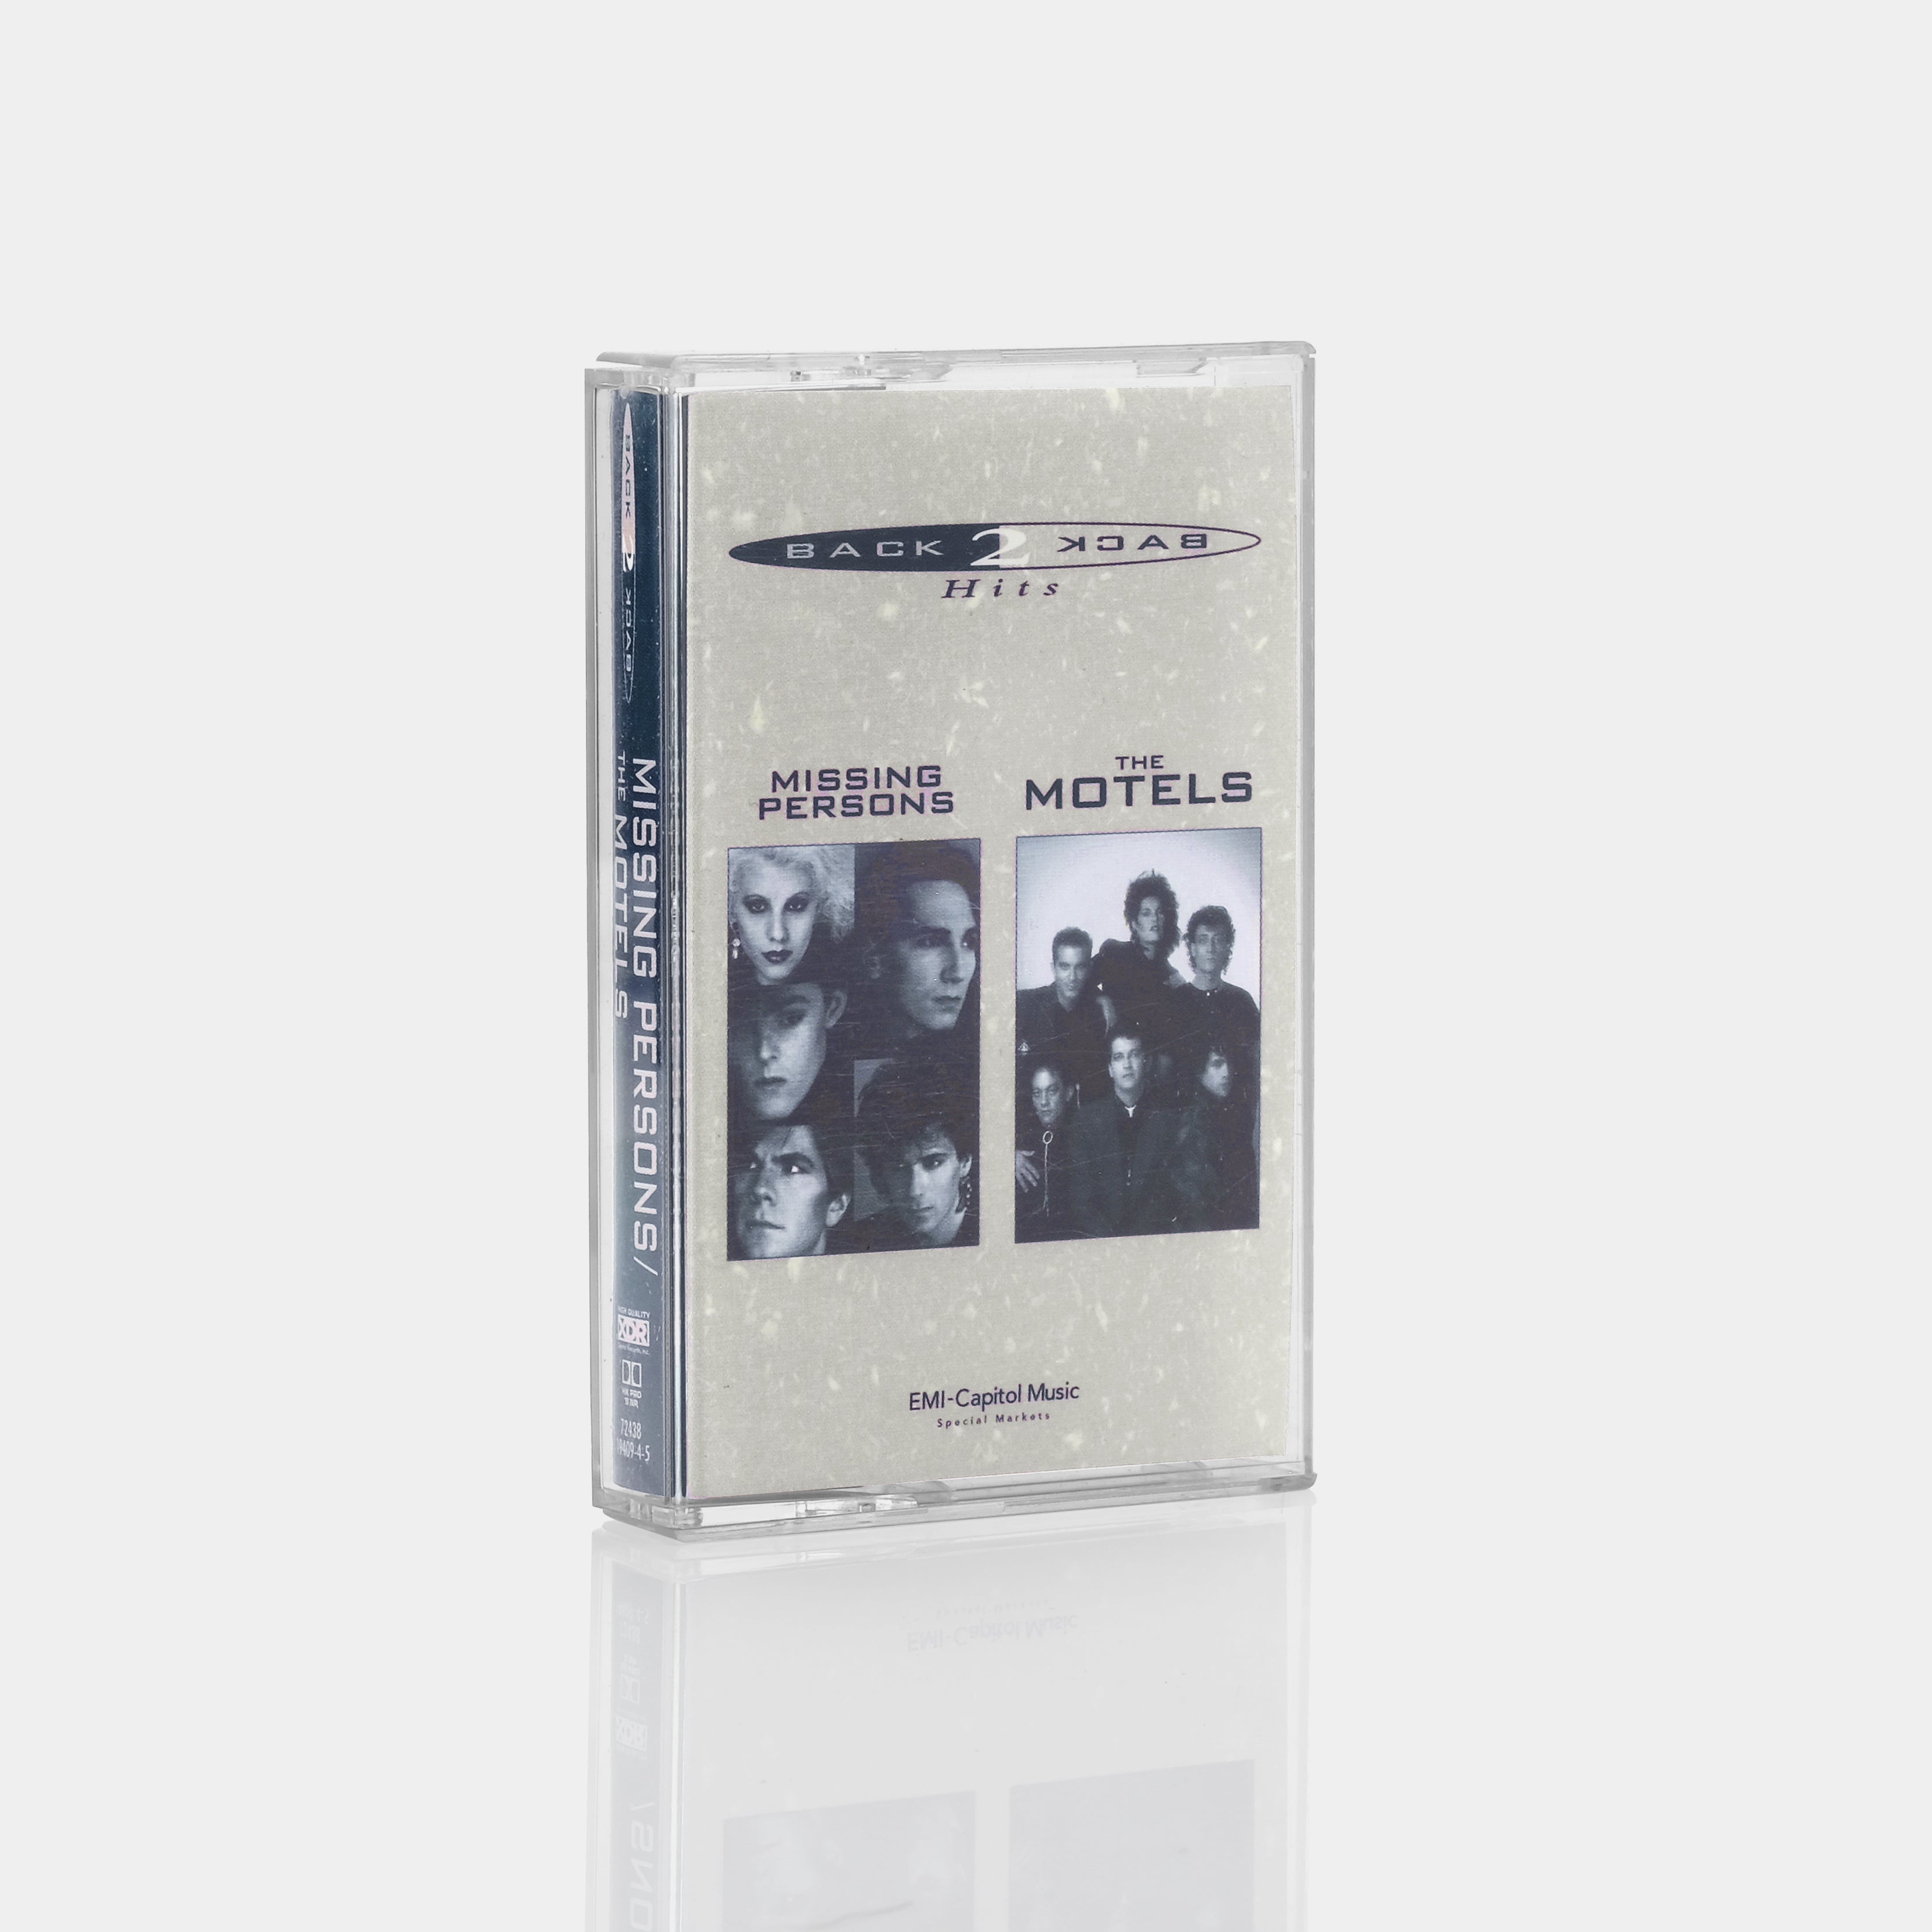 The Motels - Missing Persons Cassette Tape